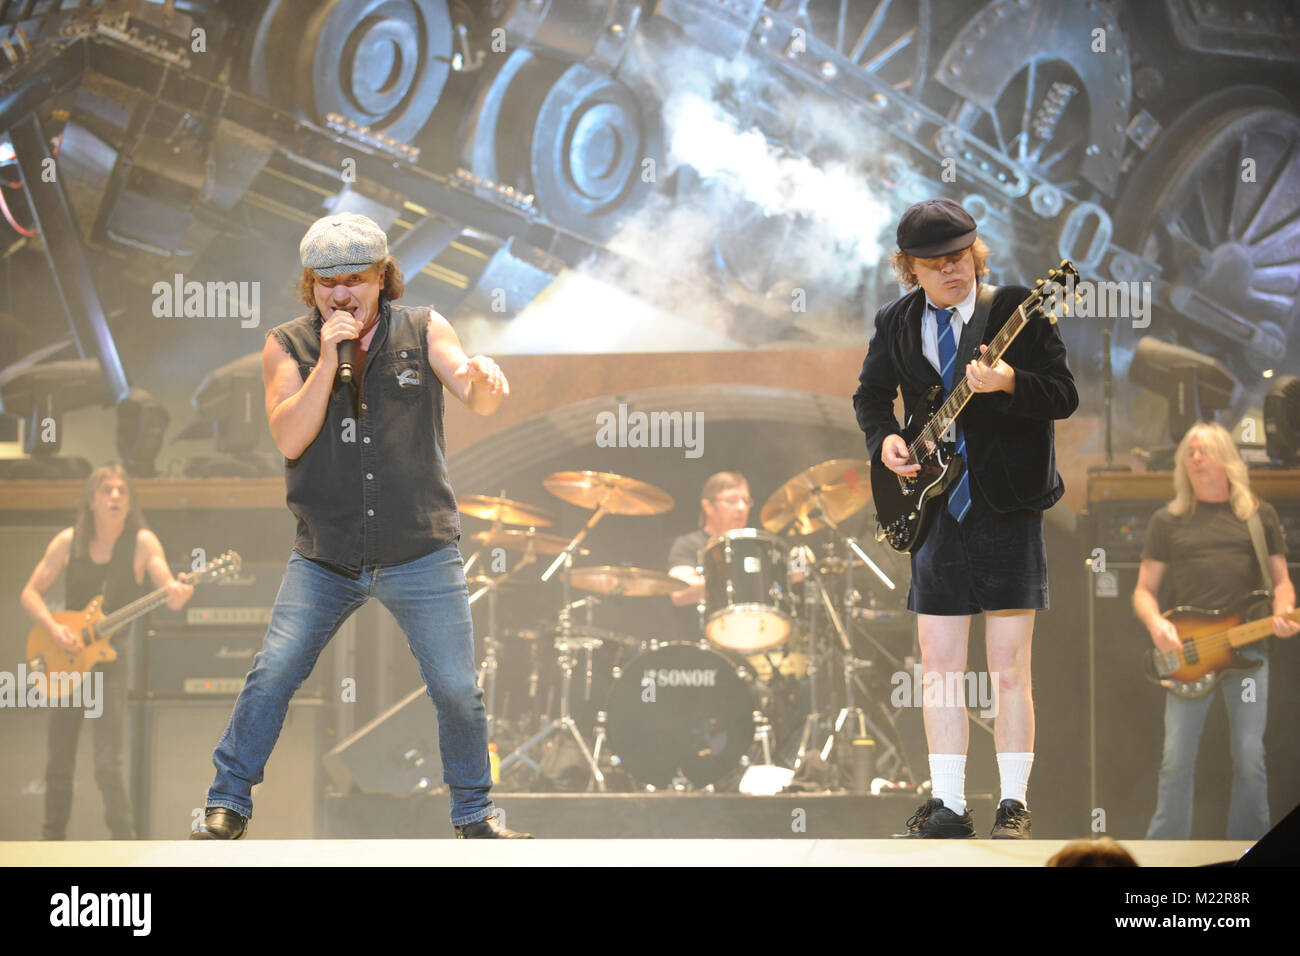 SUNRISE, FL - DECEMBER 20: Brian Johnson, Angus Young of AC/DC perform at the Bank Atlantic center on December 20, 2008 in Sunrise Florida.  People:  Brian Johnson, Angus Young Stock Photo